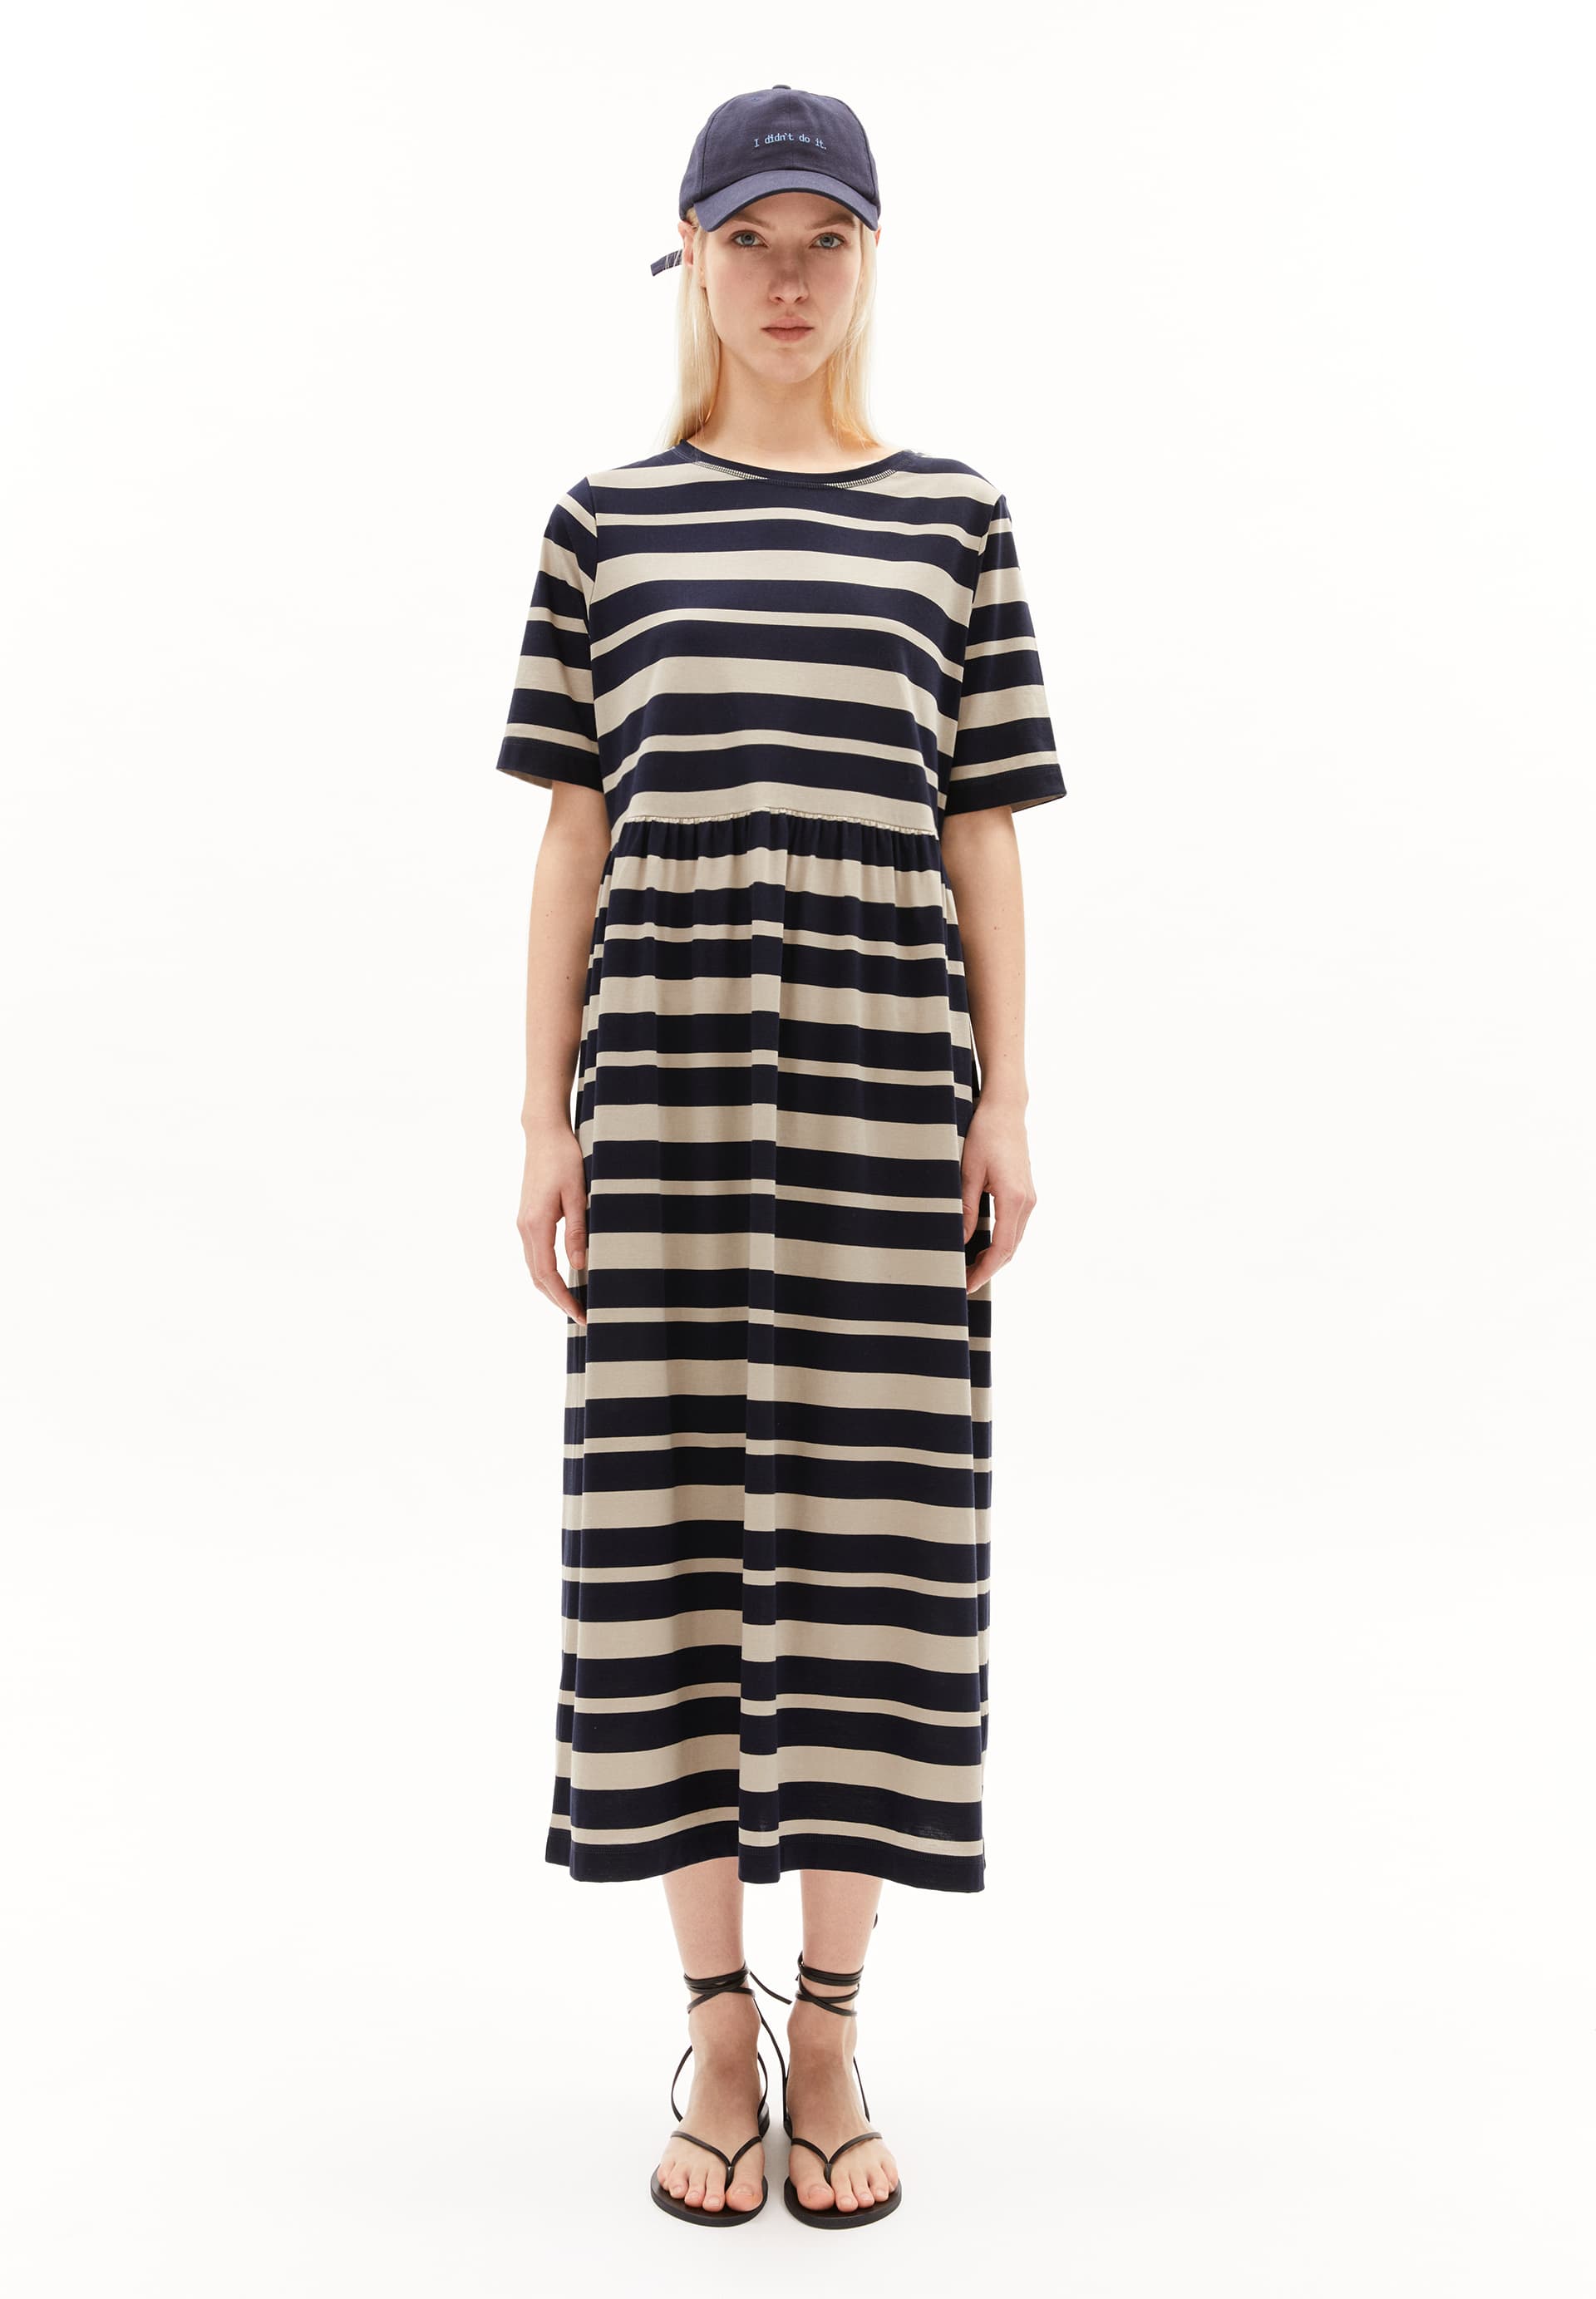 TAAKYRA BLOCK STRIPES Jersey Dress Loose Fit made of Organic Cotton